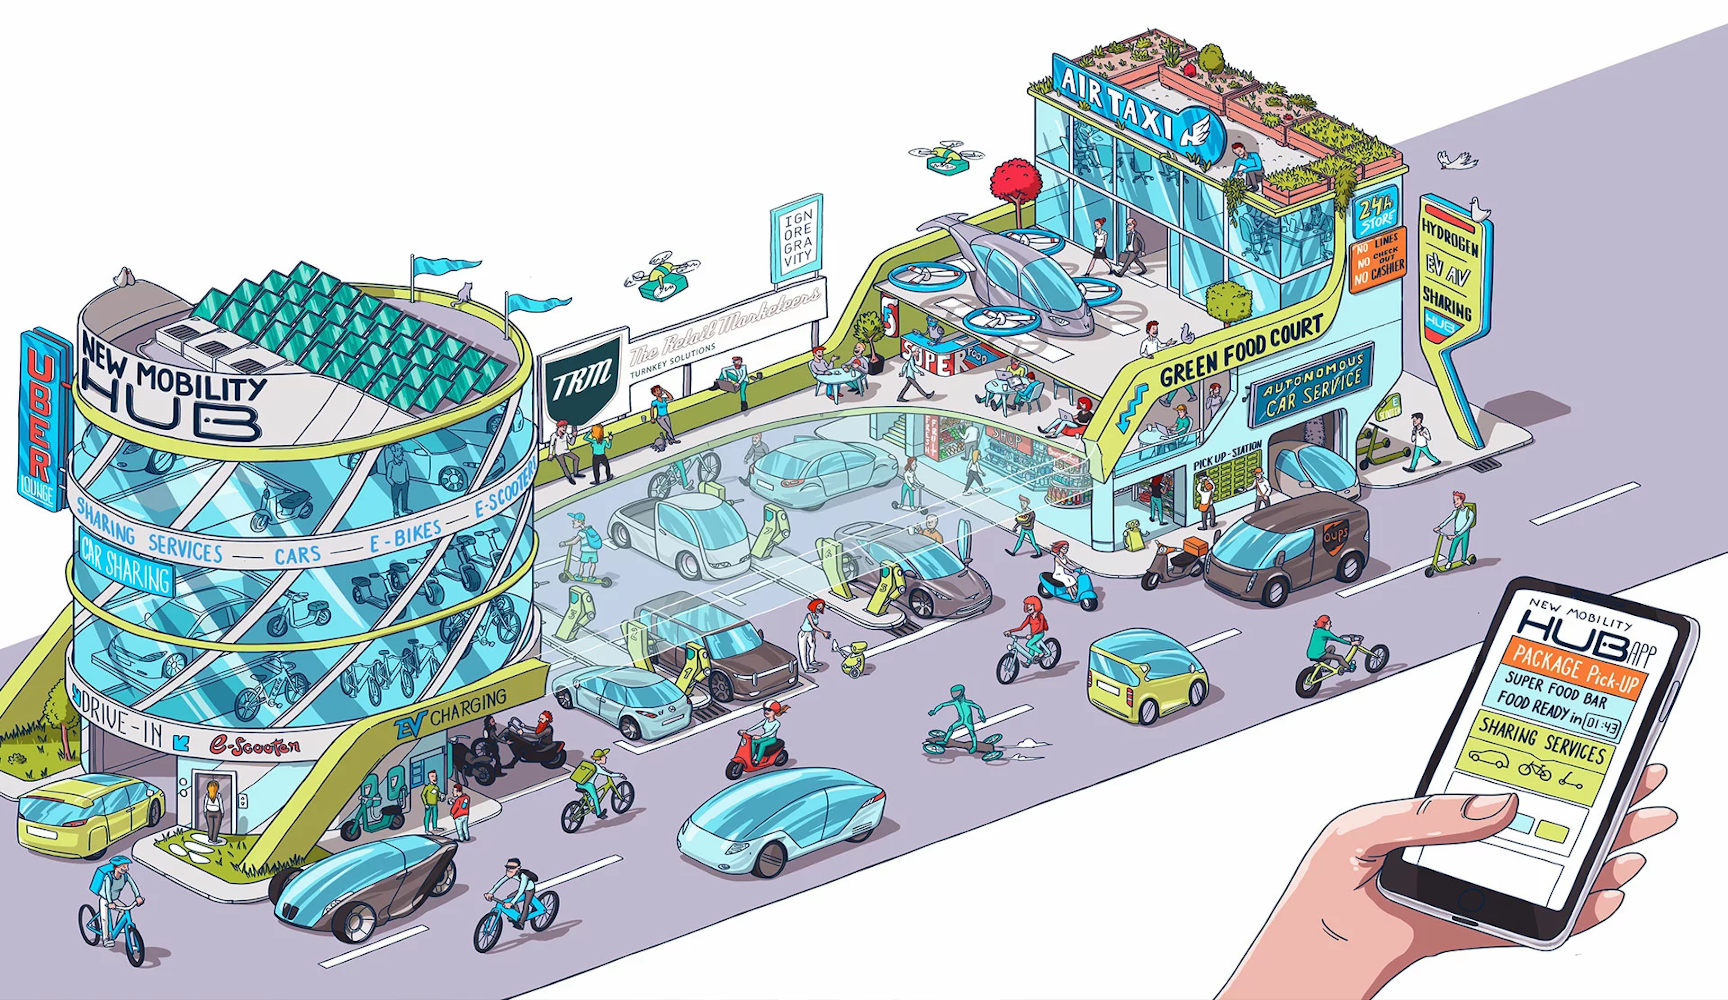 Enlarged view: Mobility hub of the future